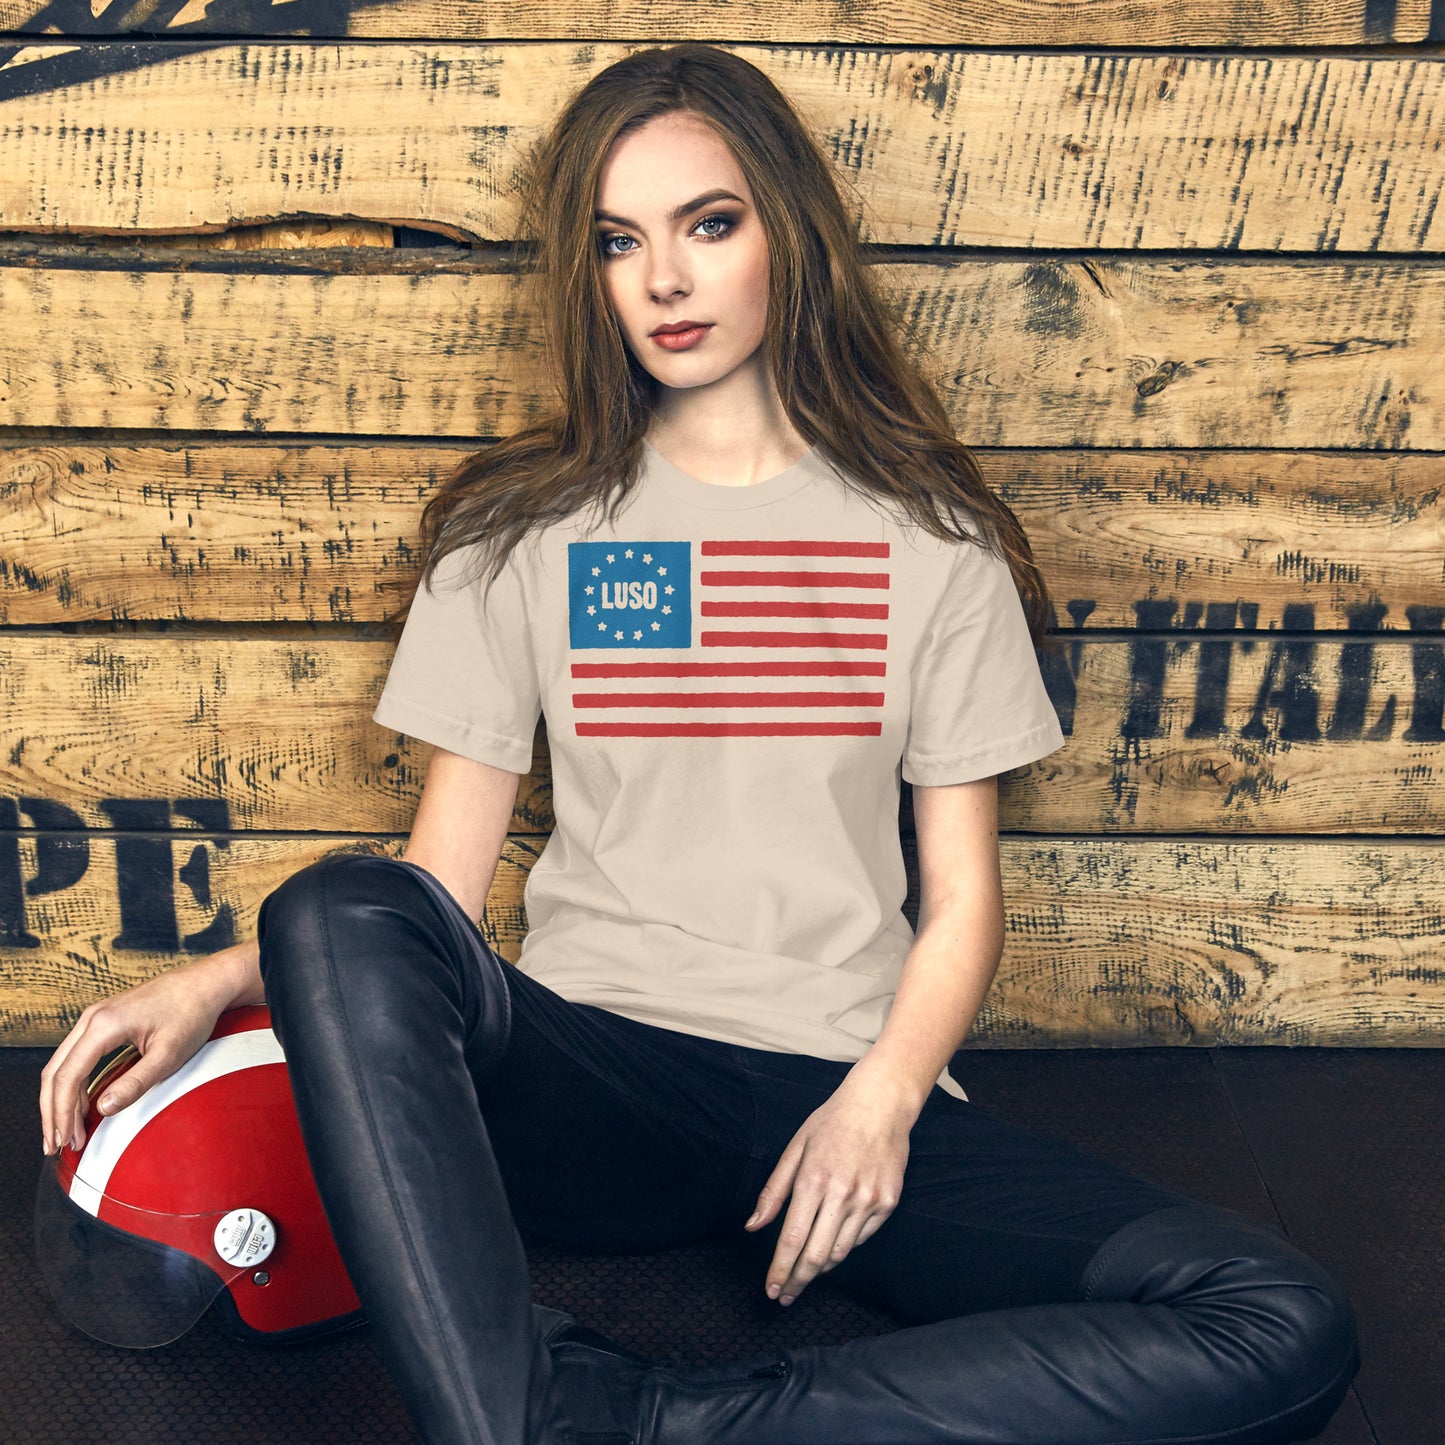 LUSO Betsy Ross Flag Tee